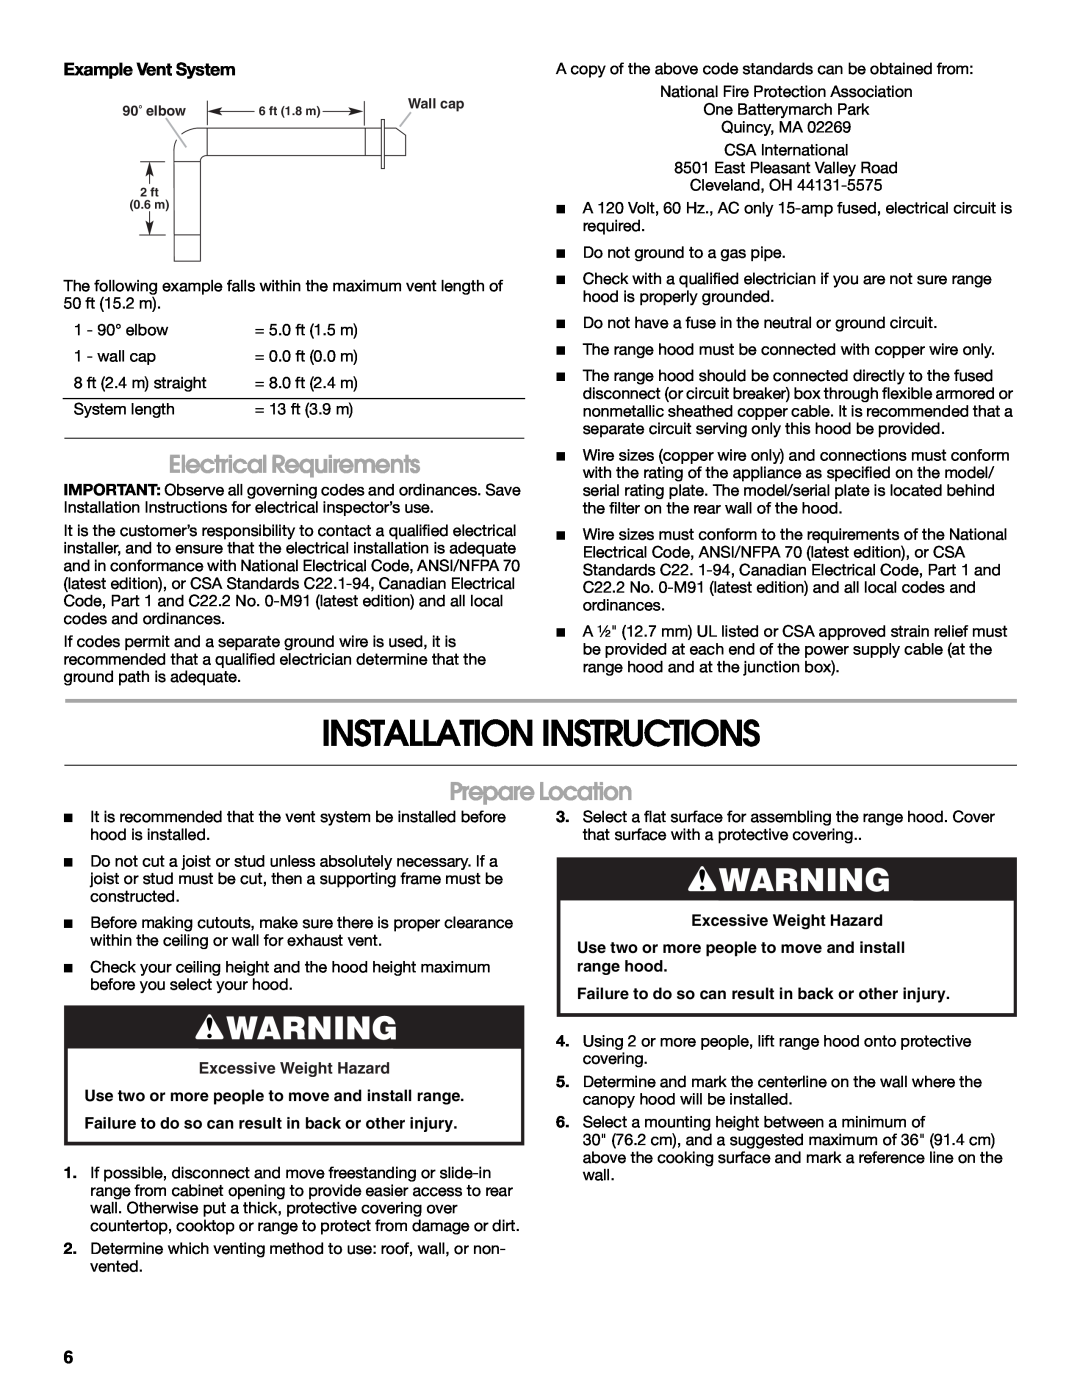 Whirlpool W10018010 Installation Instructions, Electrical Requirements, Prepare Location, Example Vent System 